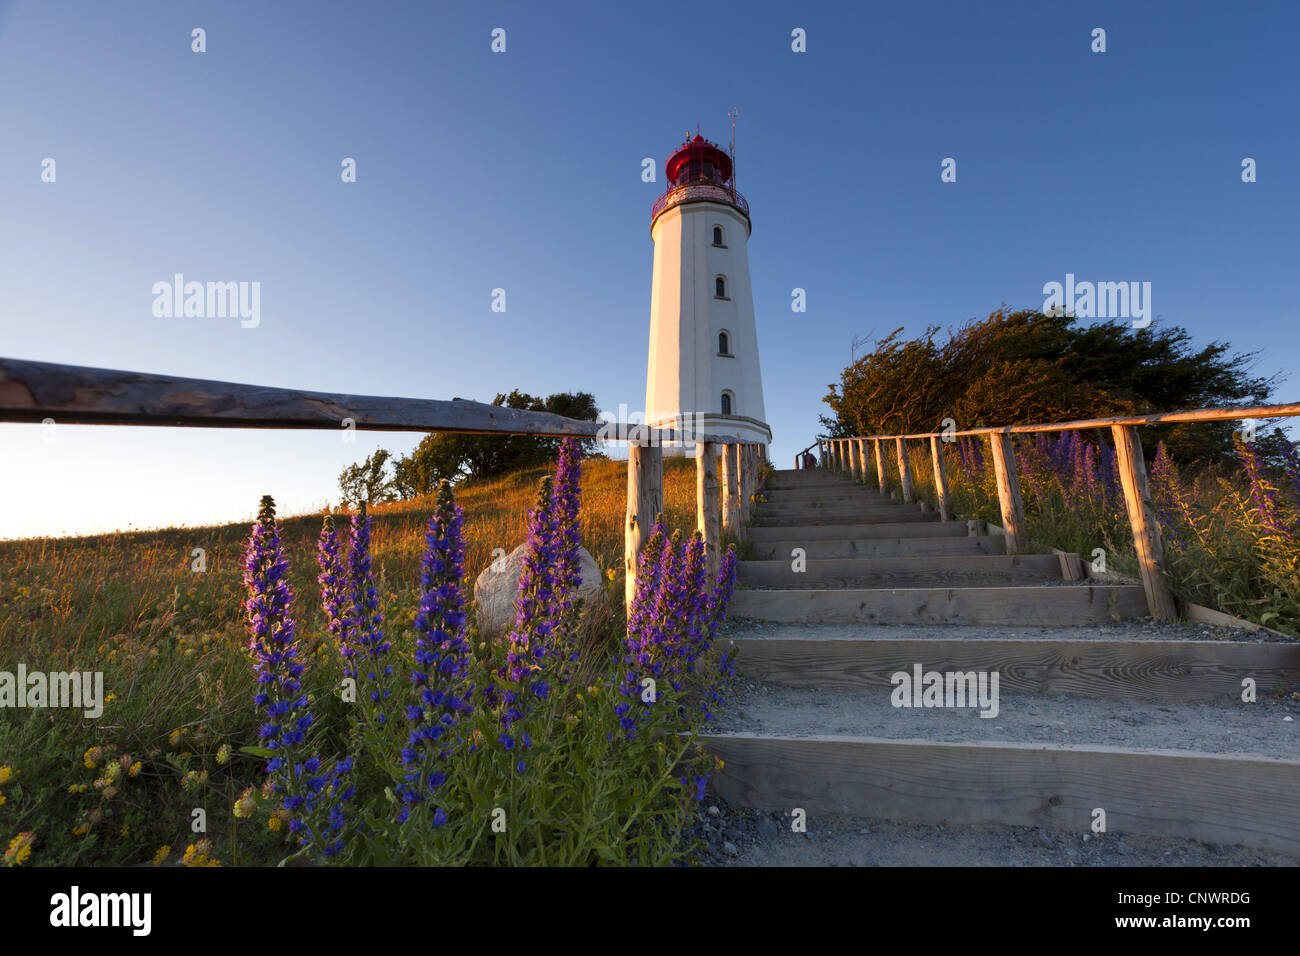 blueweed, blue devil, viper's bugloss, common viper's-bugloss (Echium vulgare), stairs to the lighthouse in the sunset, Germany, Mecklenburg-Western Pomerania, Hiddensee, Kloster Stock Photo